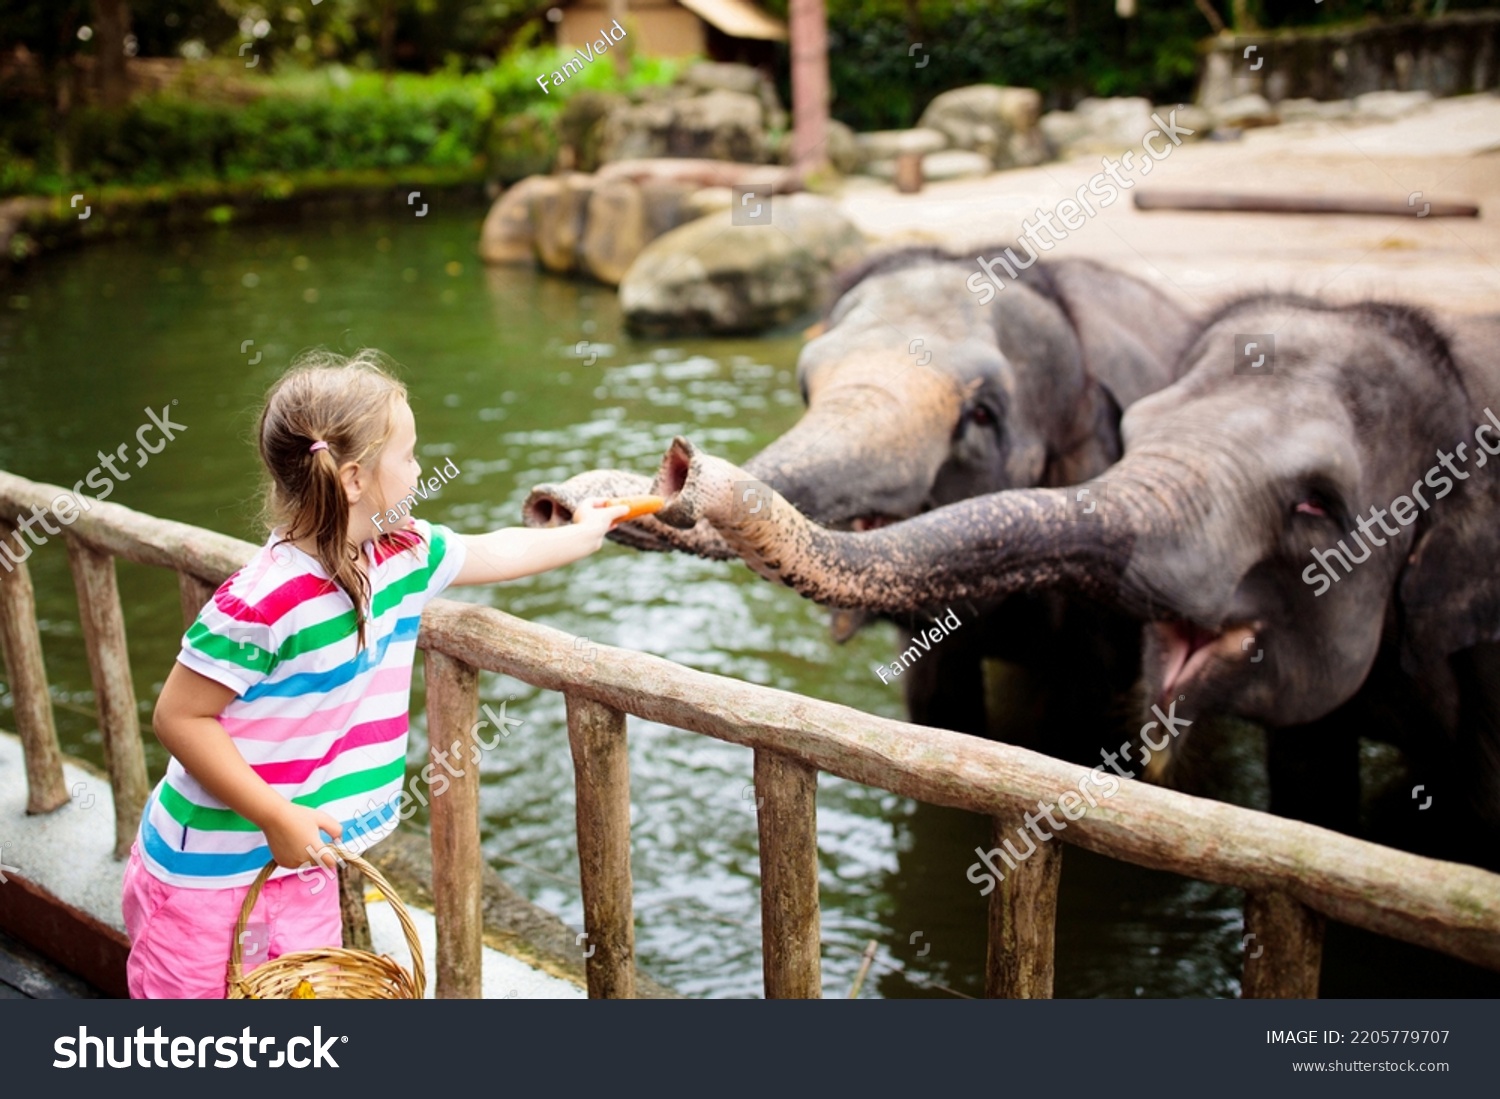 Family feeding elephant in zoo. Children feed Asian elephants in tropical safari park during summer vacation  #2205779707